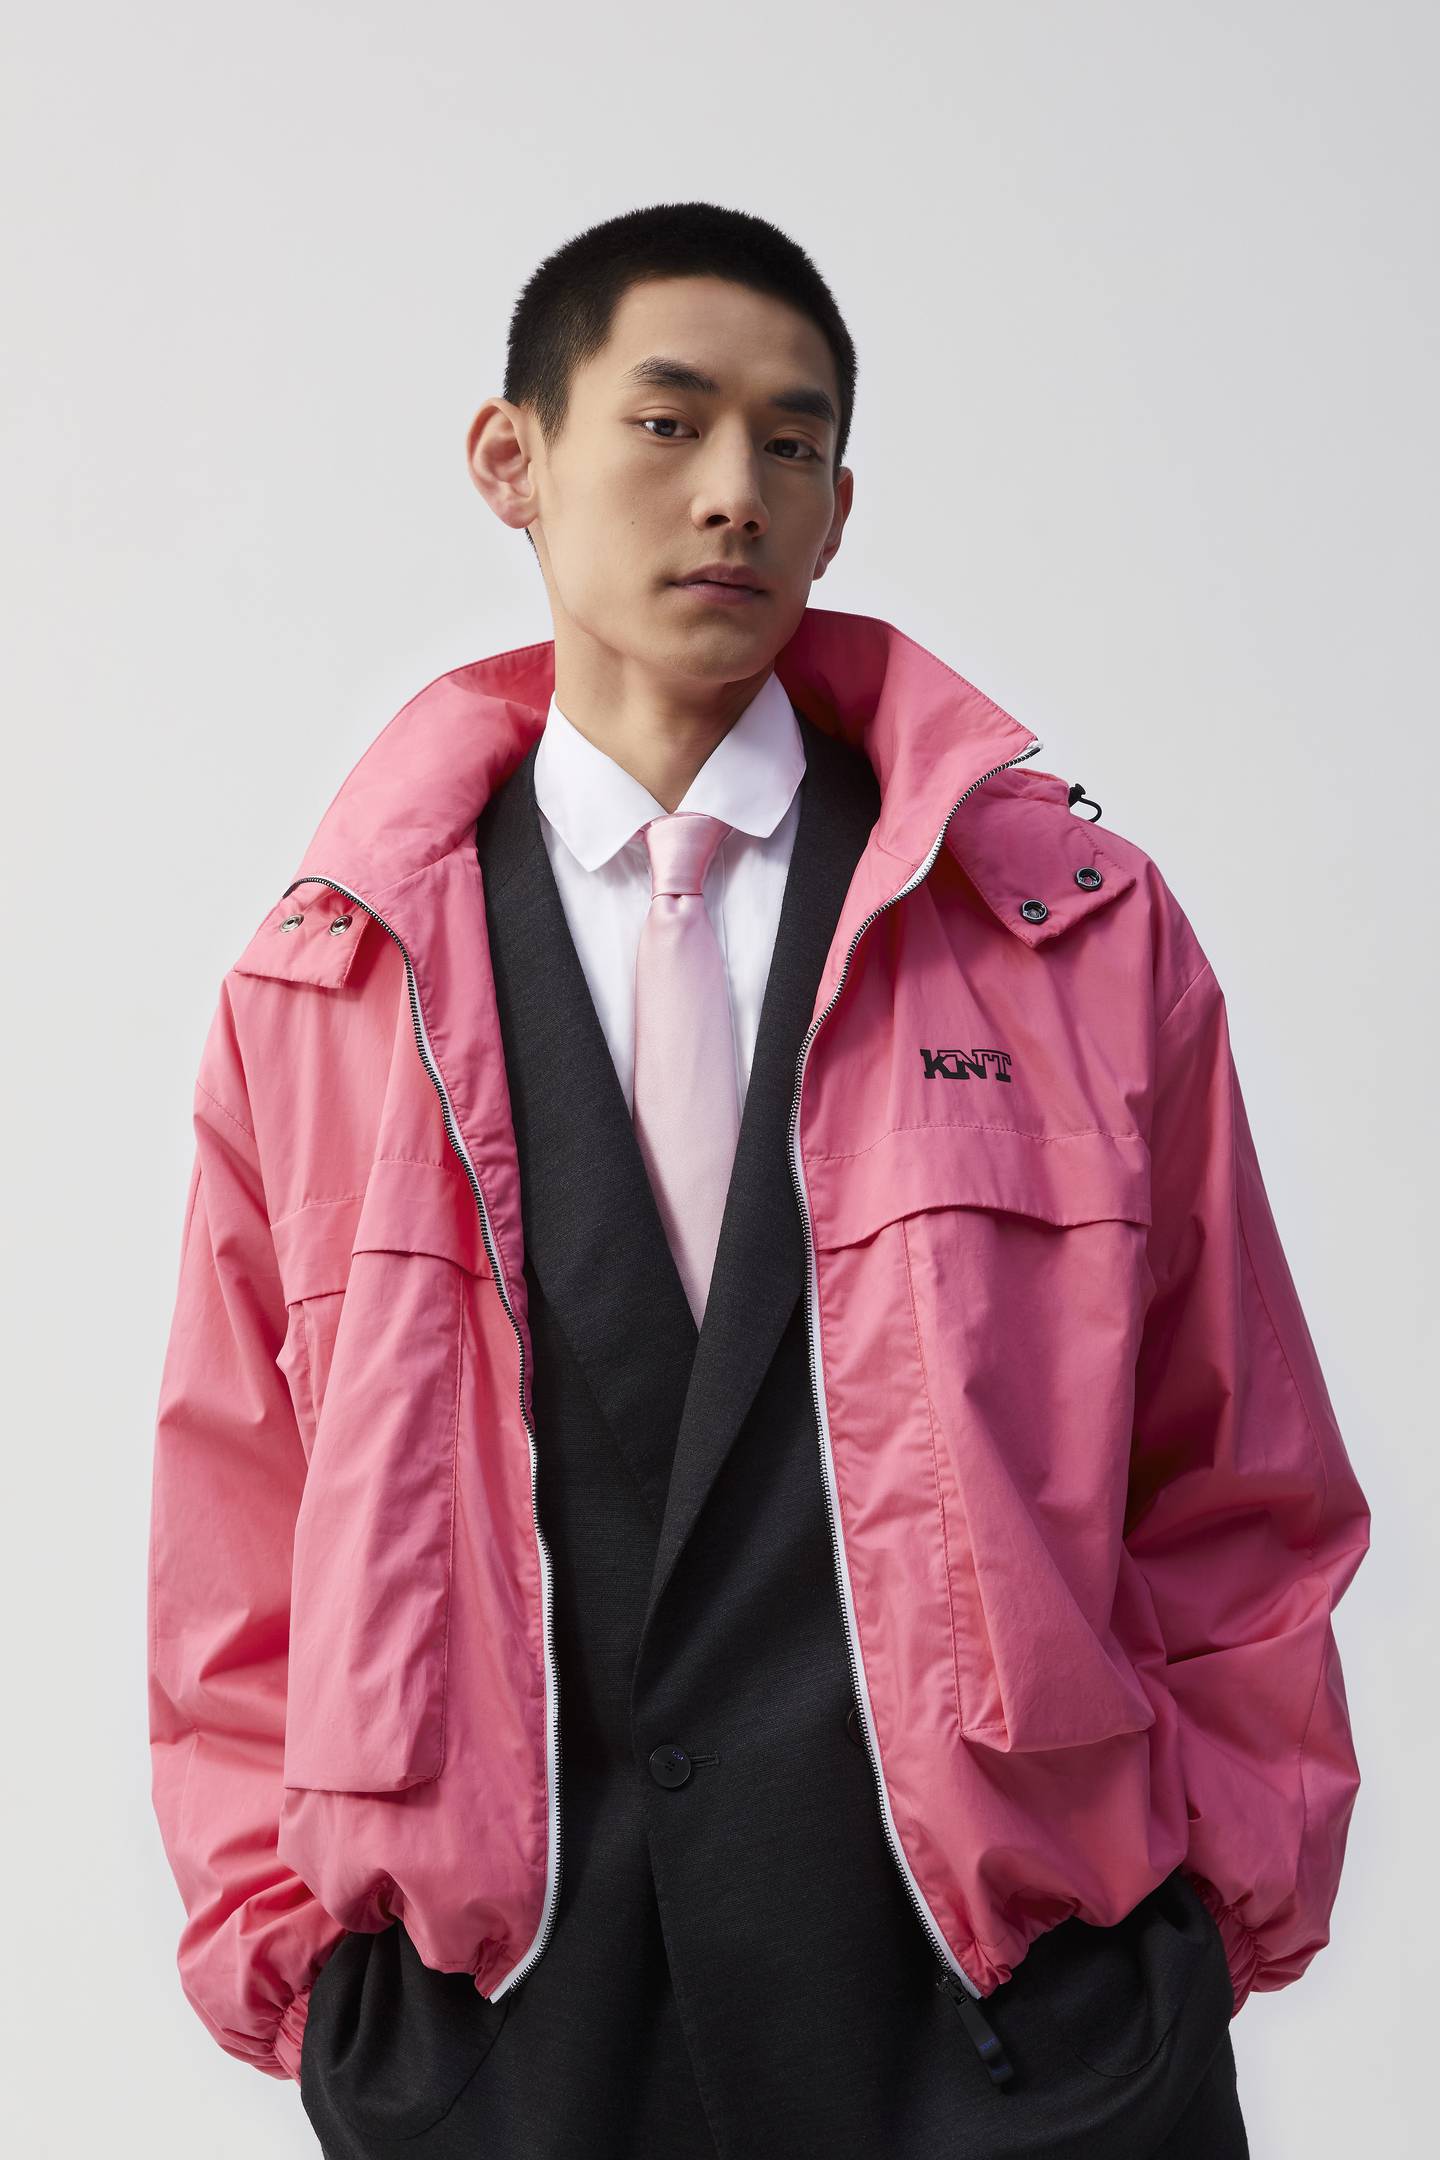 Kiton has seen soaring sales as menswear consumers blend suiting with pieces from their casualwear label, KTN.